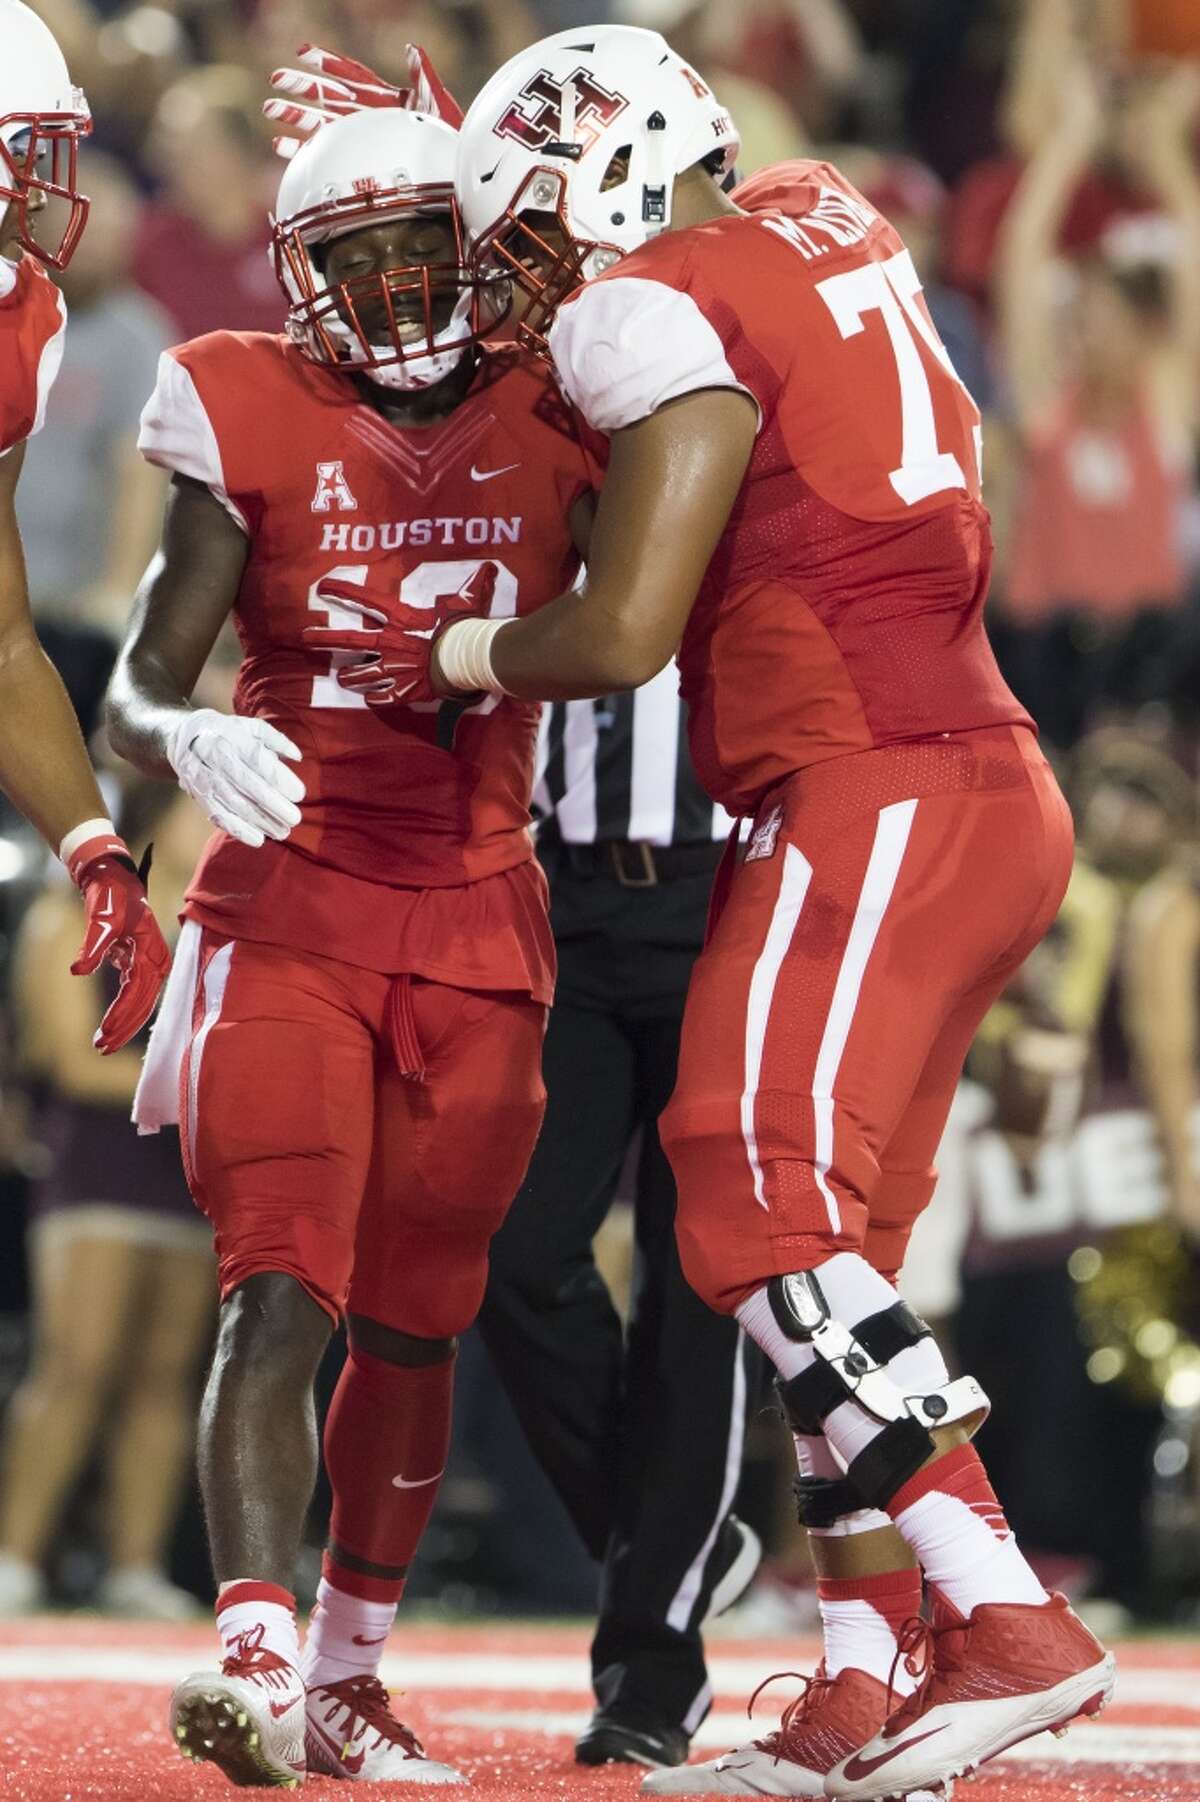 Houston Cougars' wide receiver Demarcus Ayers (10) celebrates with offensive lineman Marcus Oliver (75) after catching a touchdown in the second quarter of a NCAA college football game at TDECU Stadium on Saturday, September 26, 2015, in Houston. ( Joe Buvid / For the Chronicle )